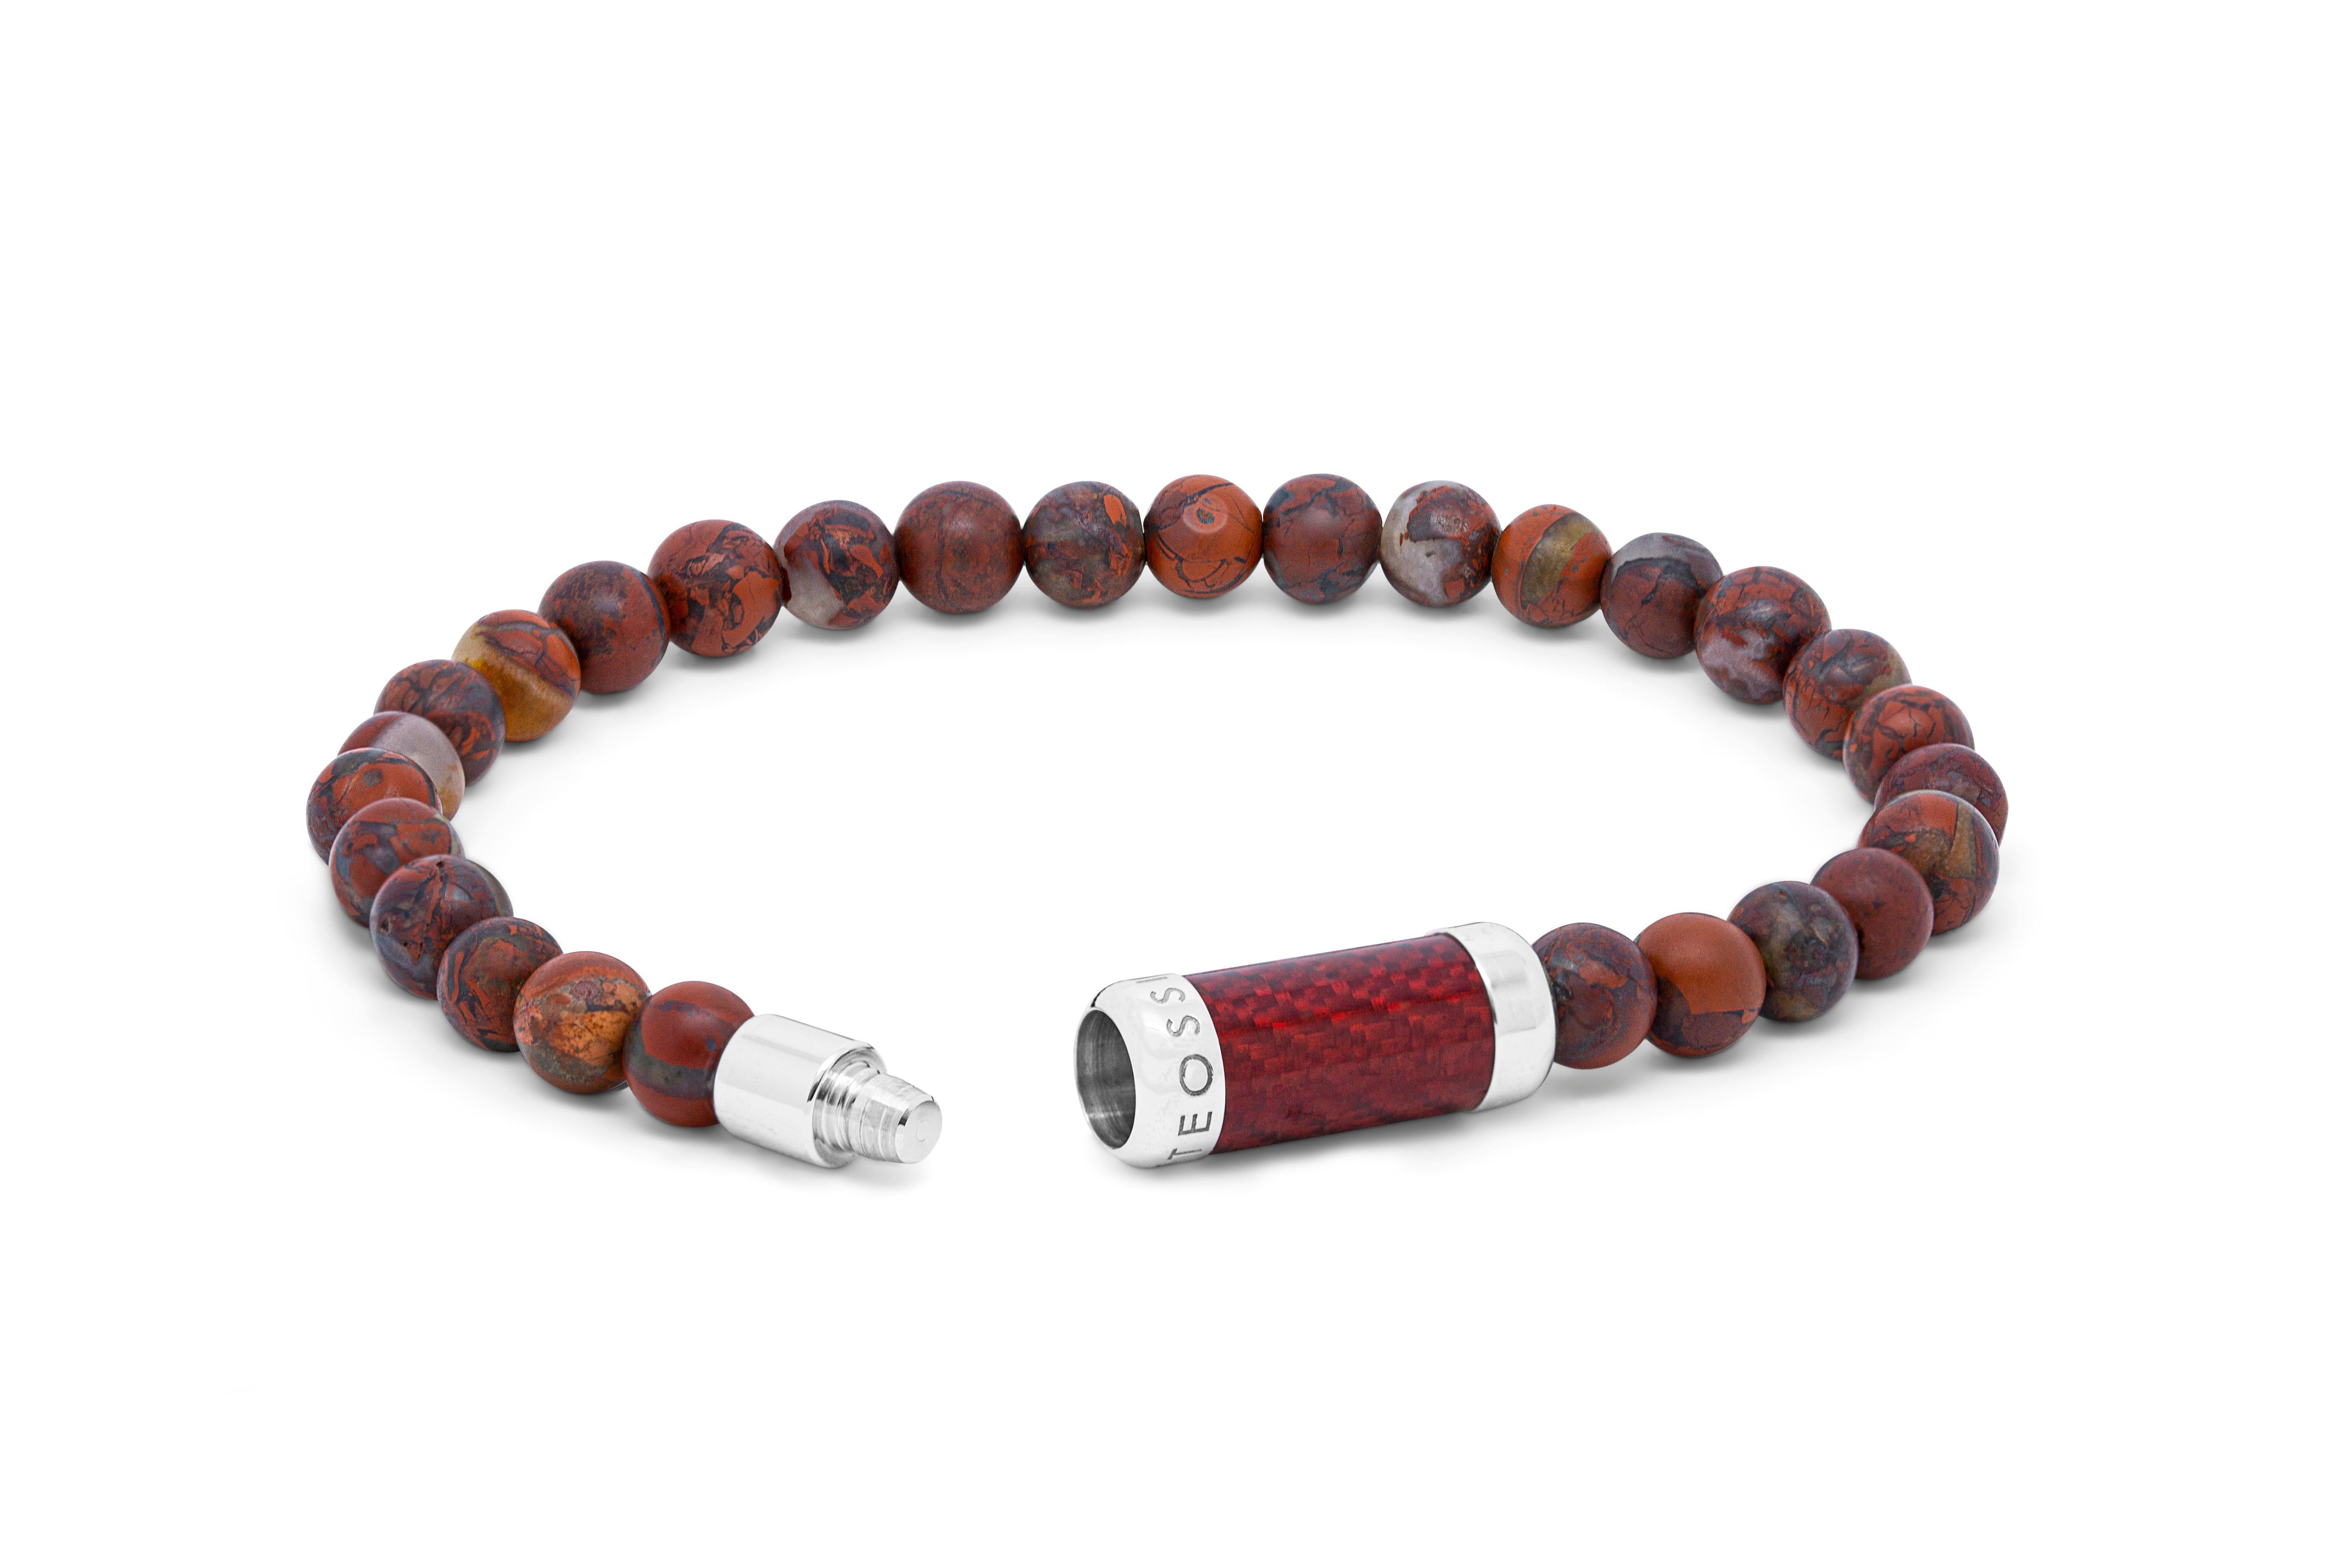 An infusion of two of our best sellers, this bracelet combines our classic semi-precious stone components with our unique carbon fibre montecarlo pop clasp. The variety of innovative materials come together in a colour coordinated style, designed to